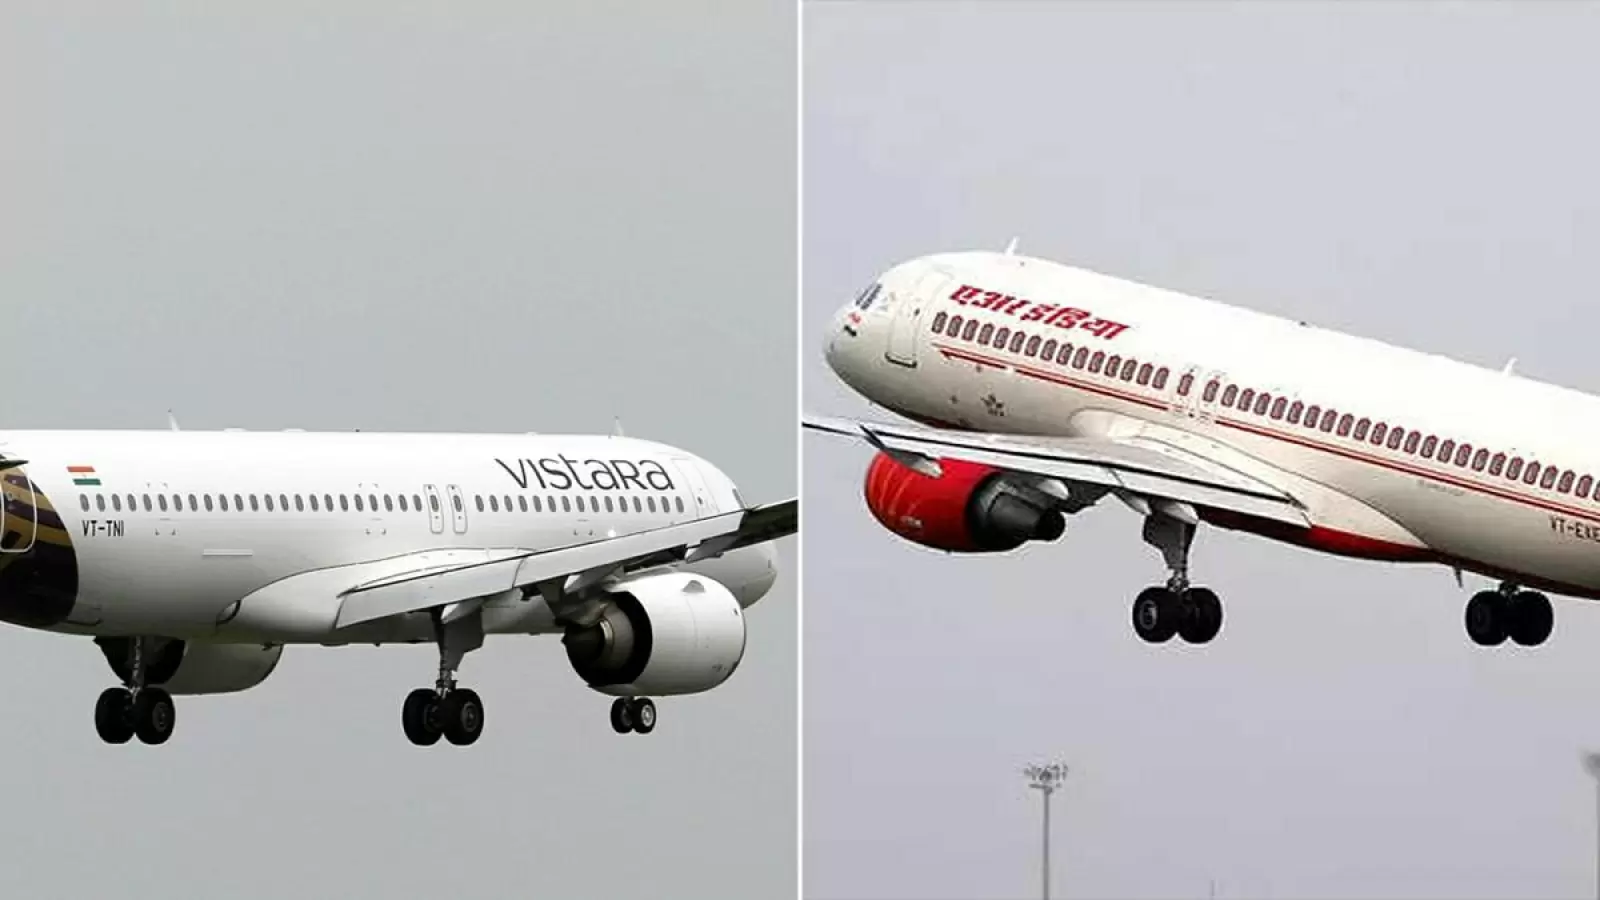 Merger of Air India and Vistara still delayed, Singapore Airline gives new update